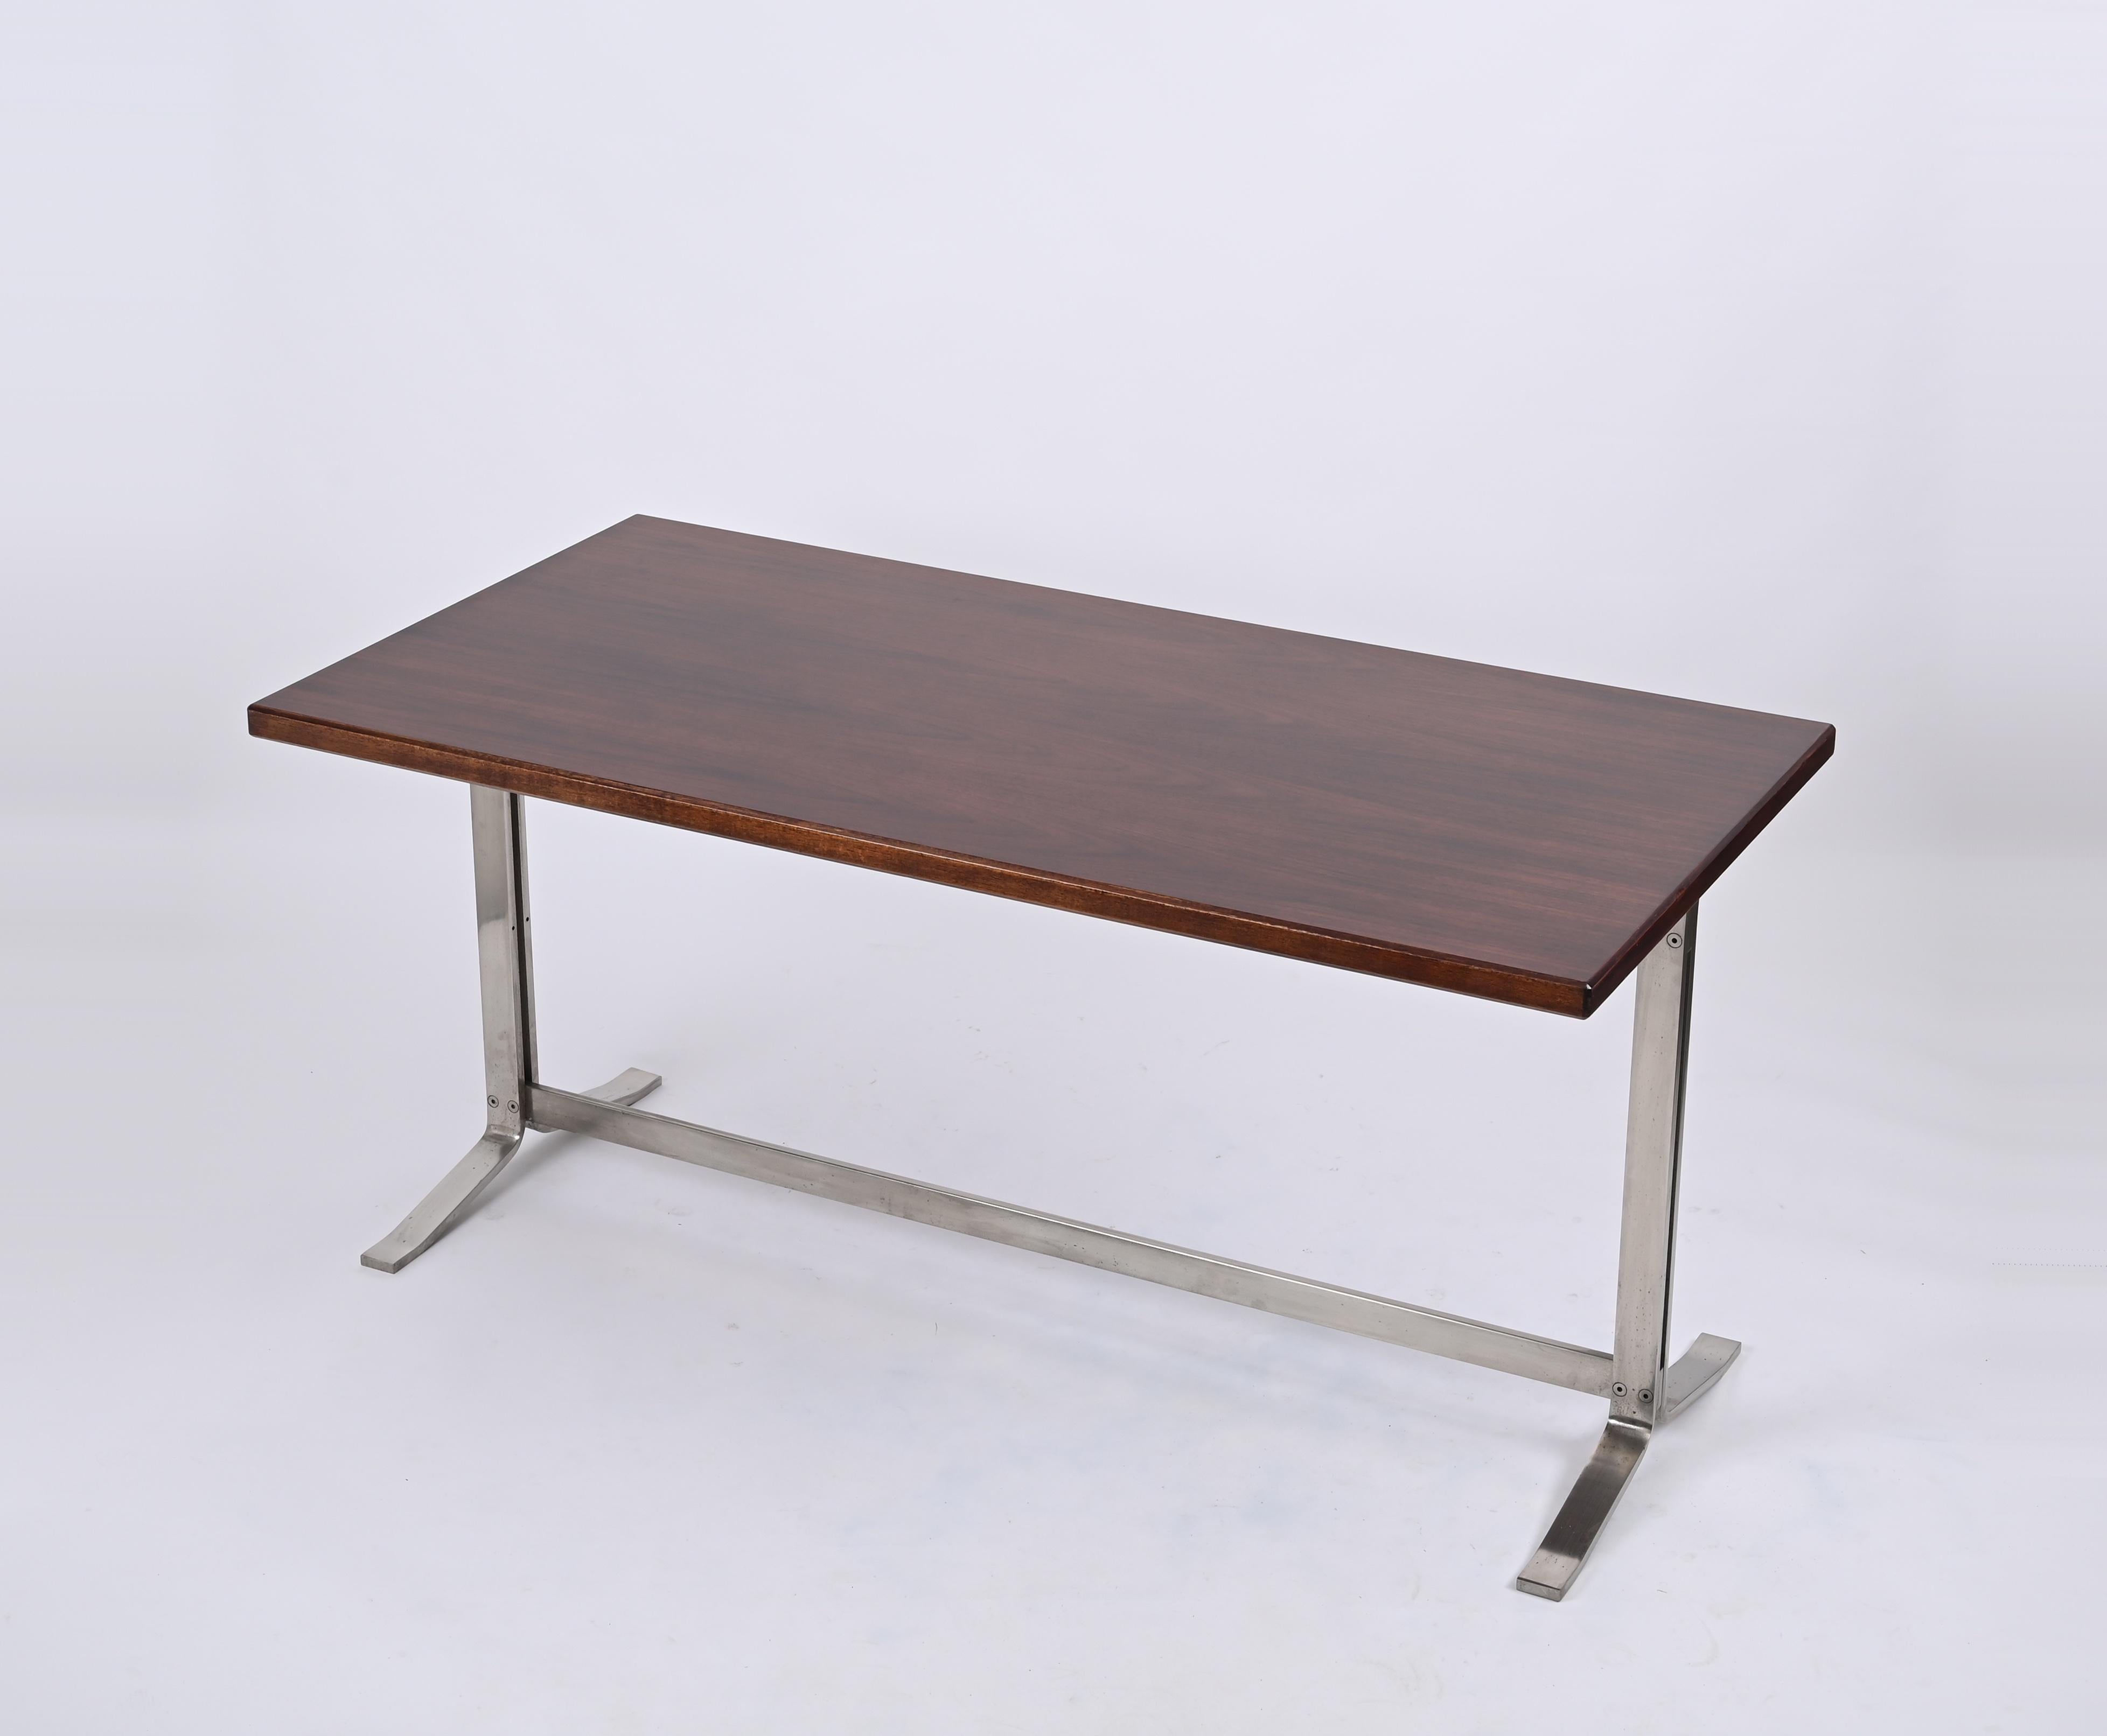 Midcentury Desk in Walnut and Steel by Moscatelli for Formanova, Italy, 1965 For Sale 8